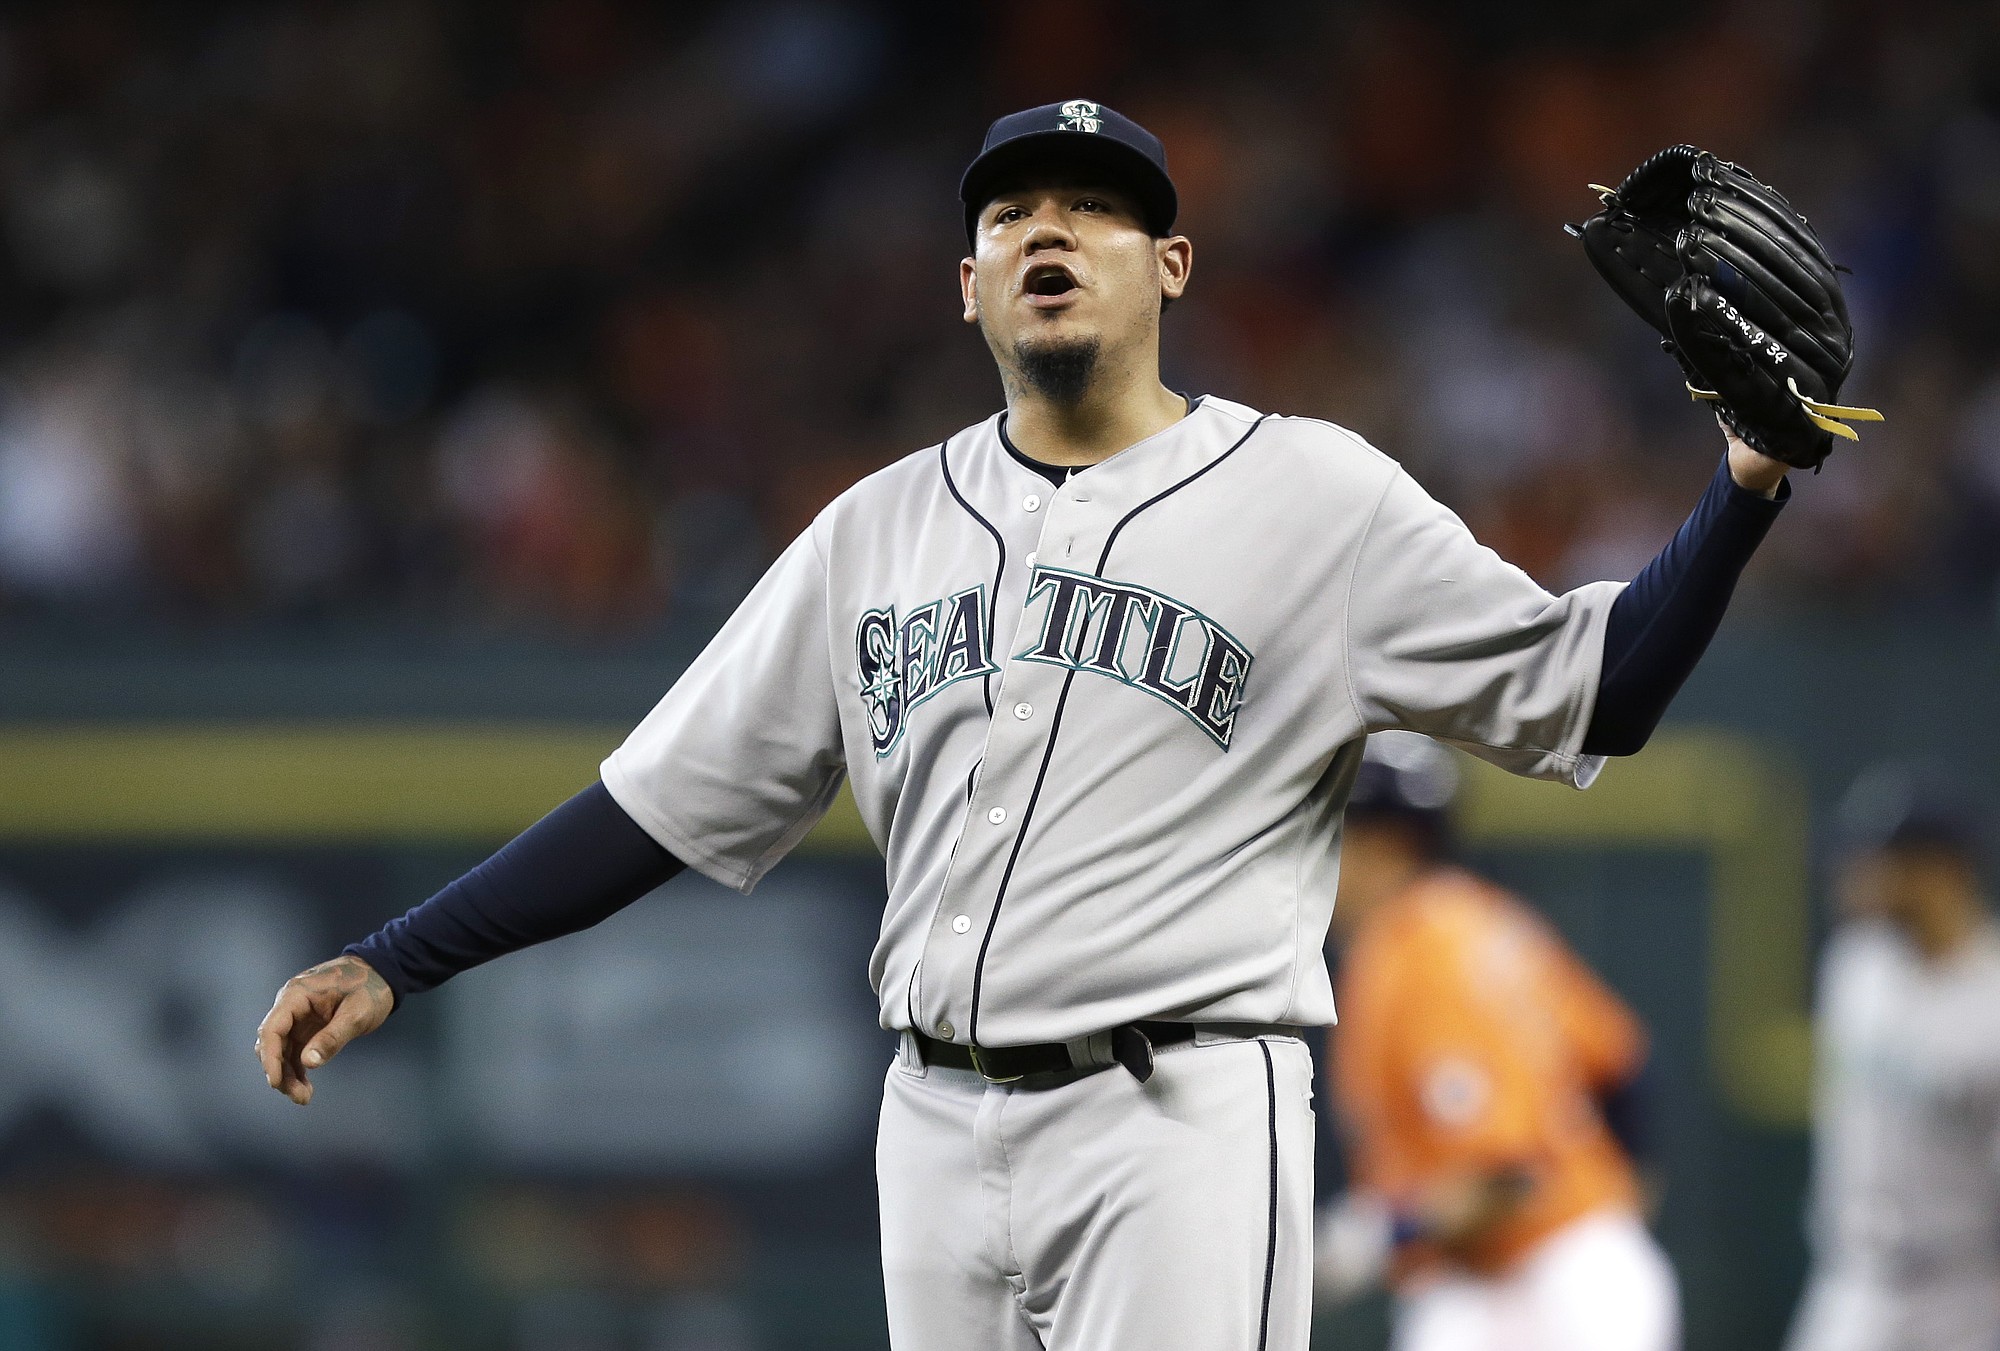 Astros rough up King Felix in 10-0 win over Mariners - The Columbian